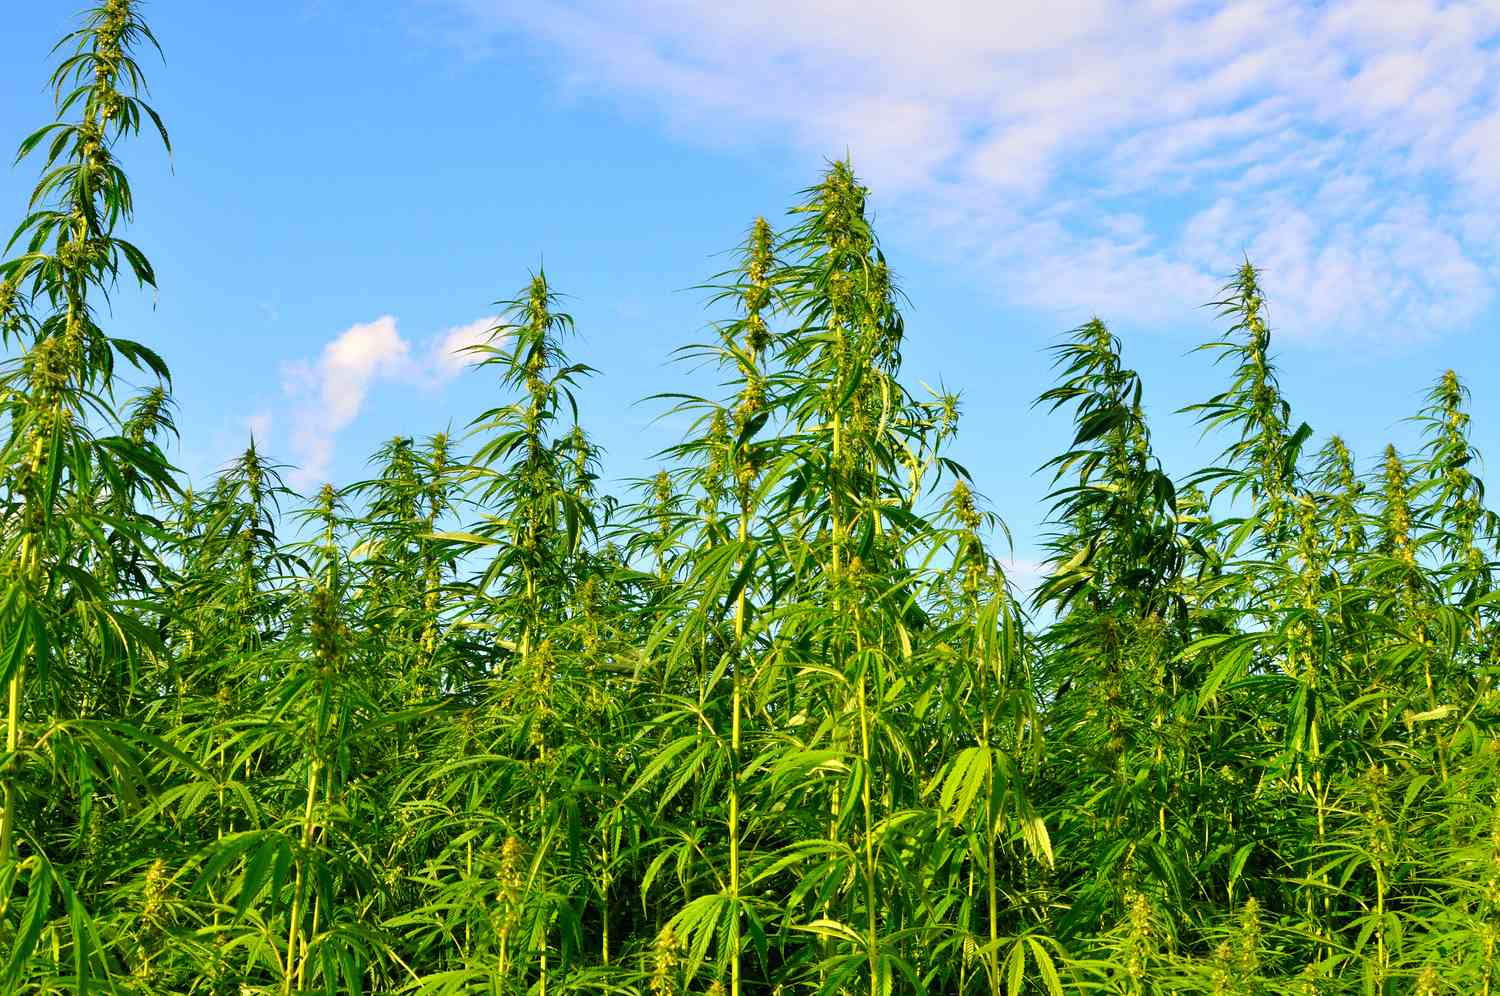 New UK Research Study Tests If Hemp Can Help Countries Reach Carbon Neutrality